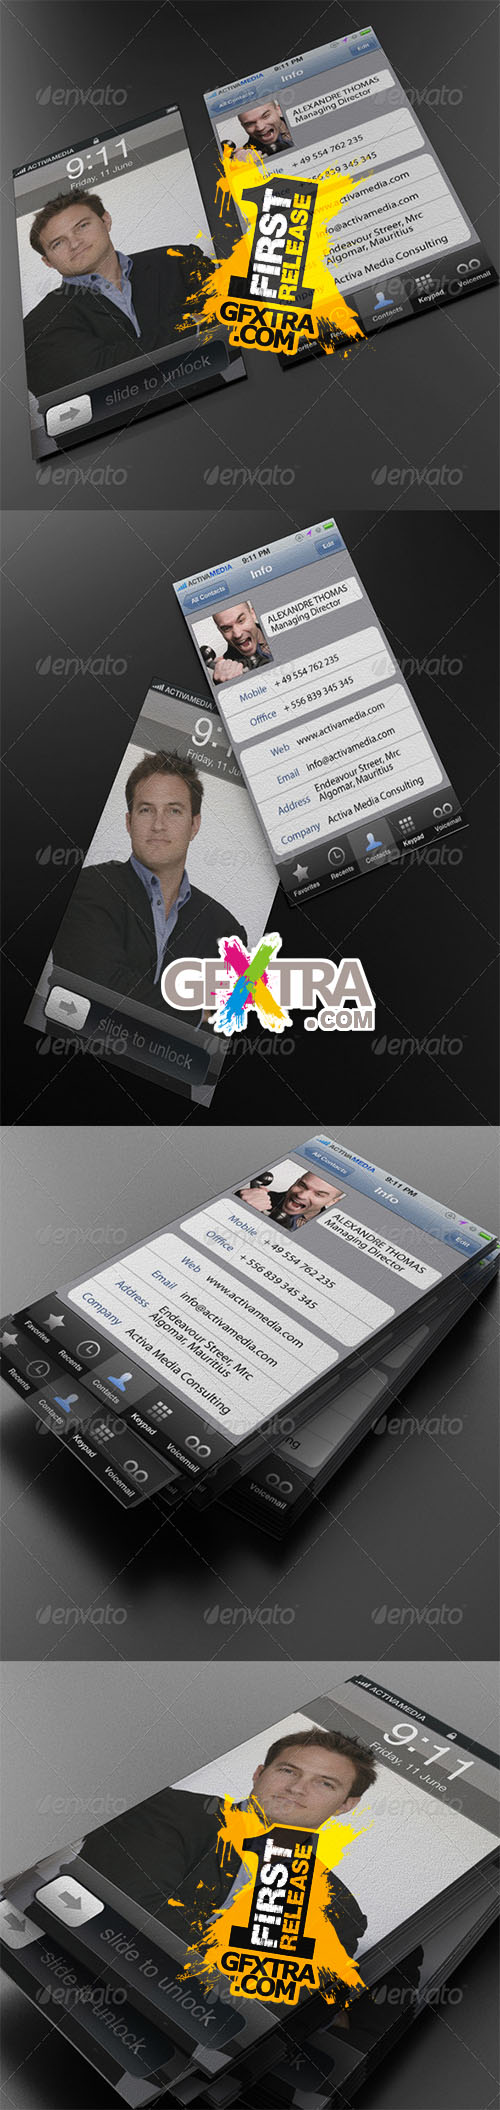 GraphicRiver - Phone Business Card